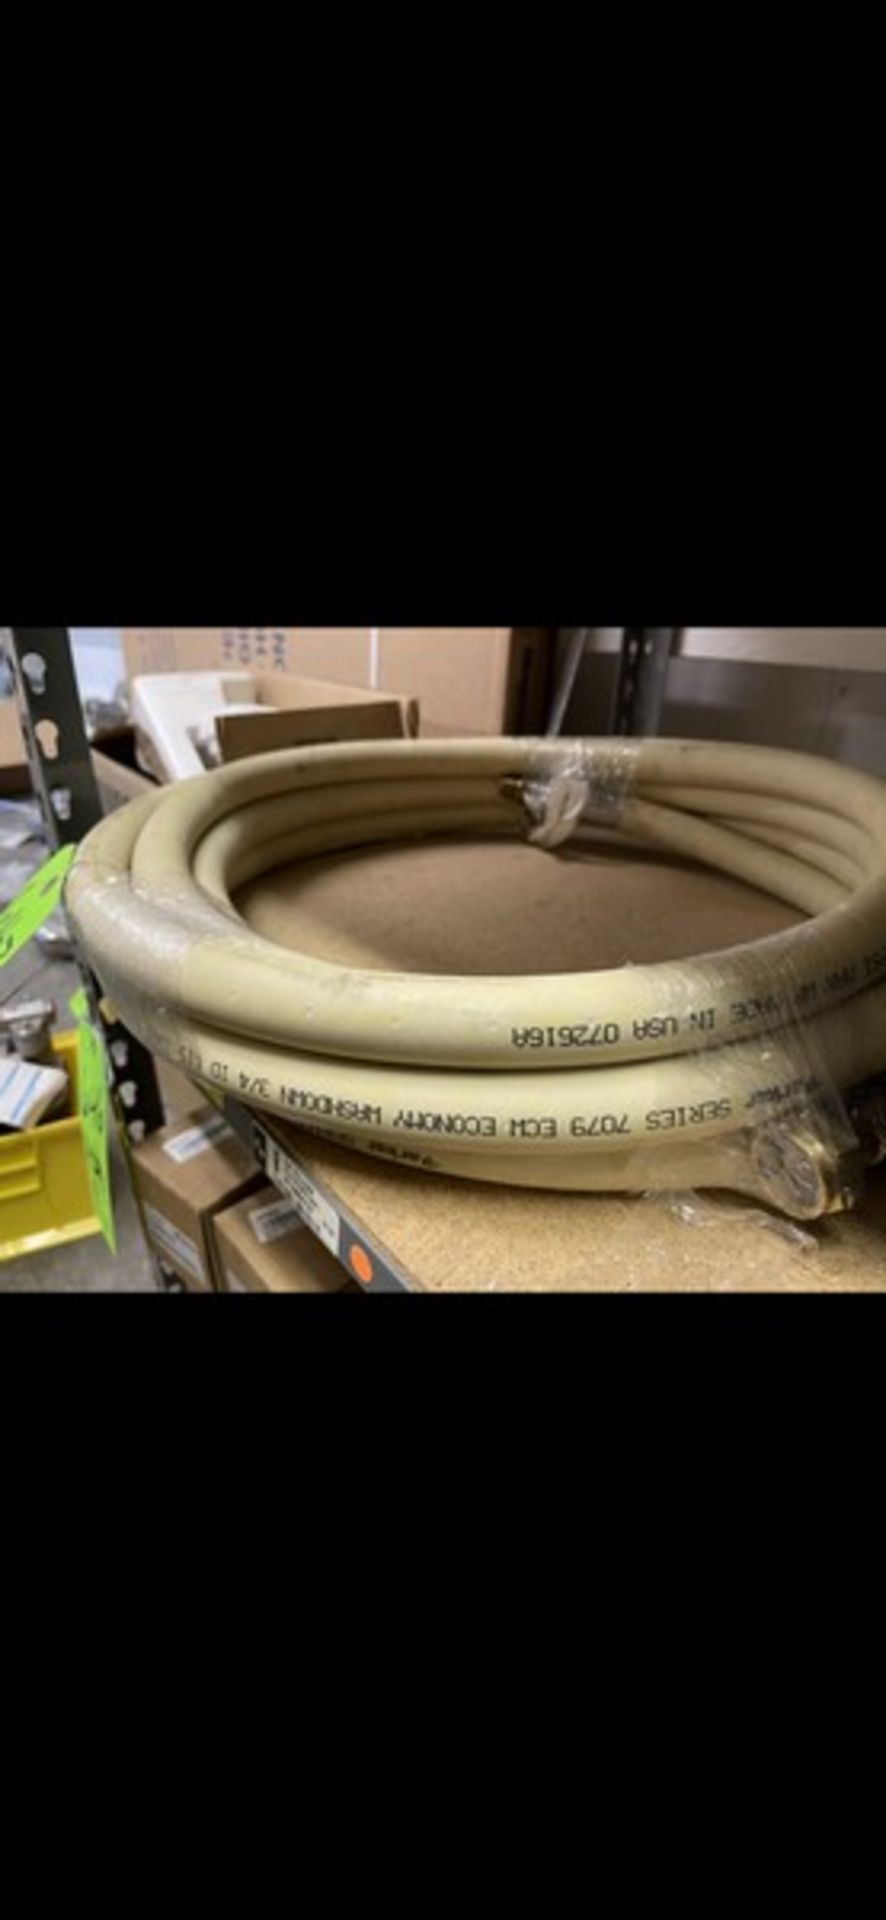 PARKER SERIES 7079 SANITARY HOSE (RIGGING, SITE MANAGEMENT AND LOADING FEE $10.00) (DOES NOT INCLUDE - Image 2 of 3